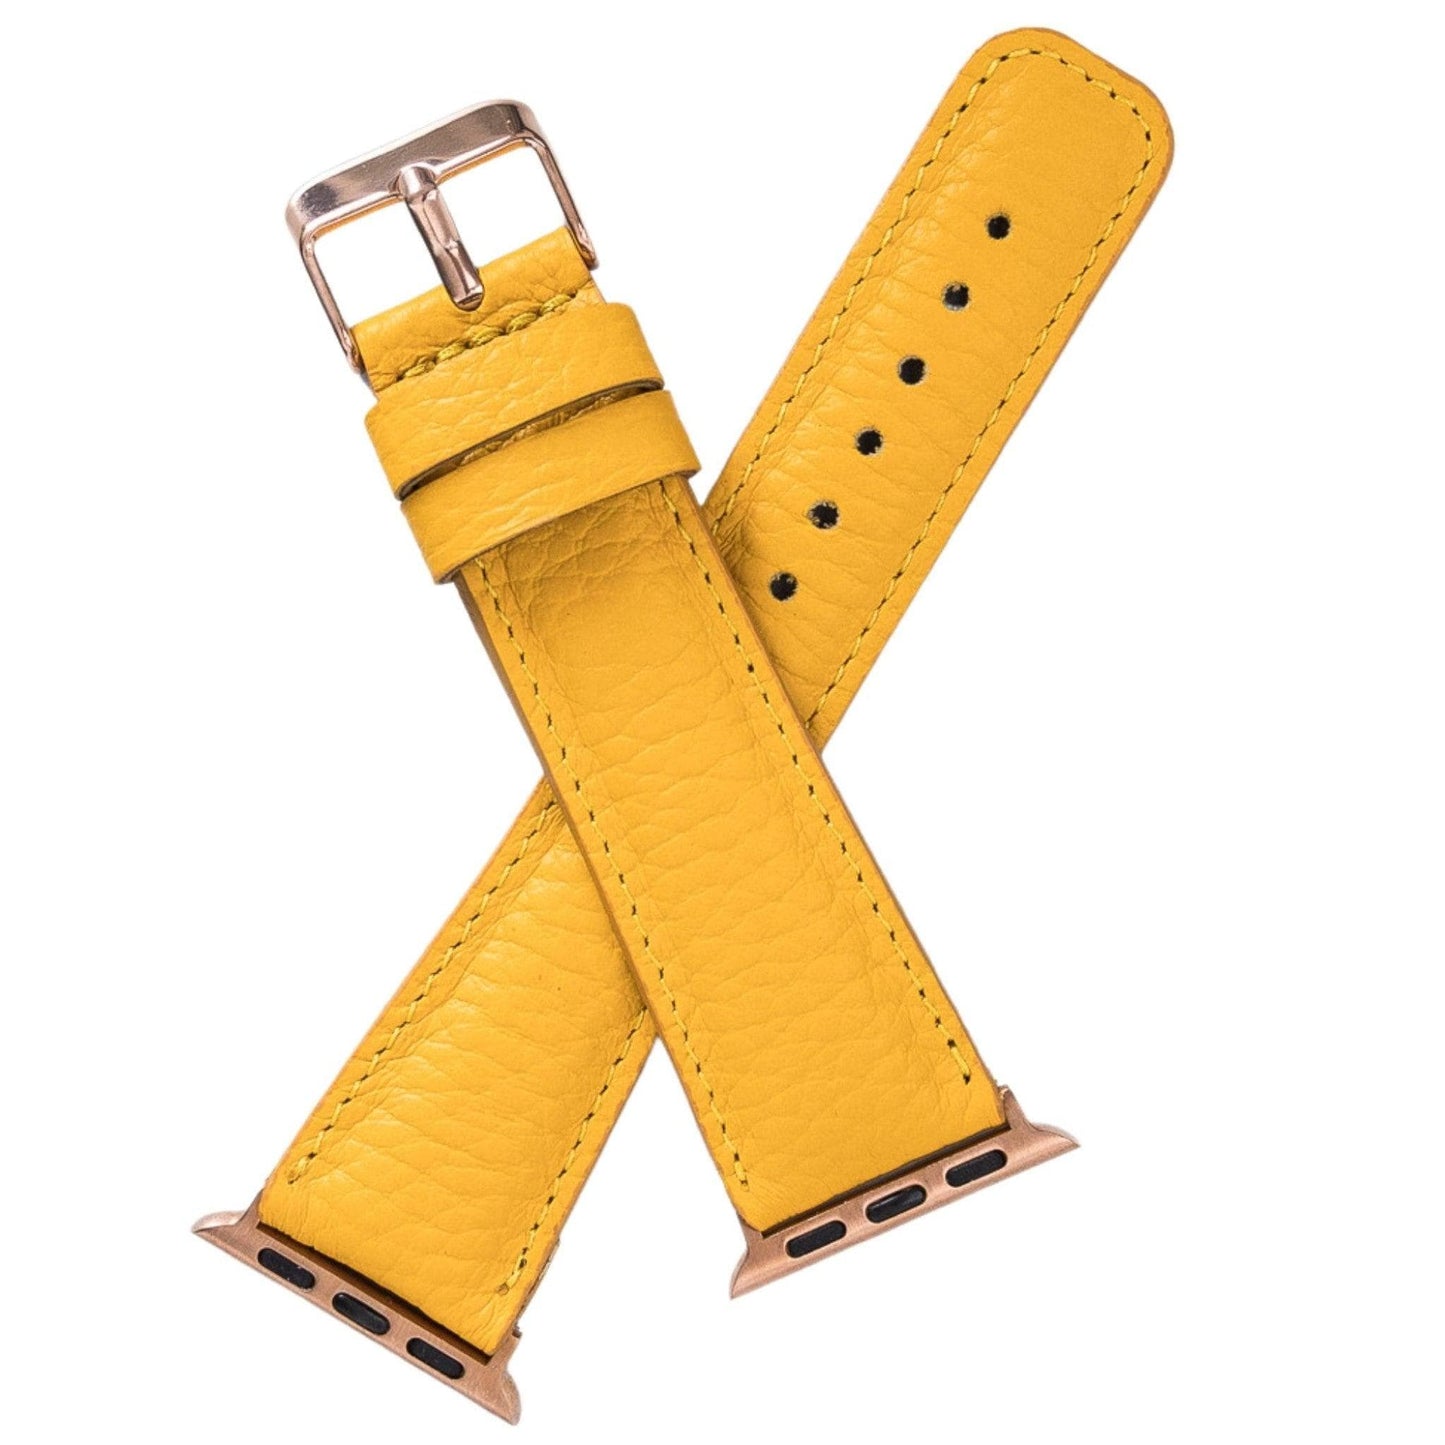 Exeter Classic Apple Watch Leather Straps